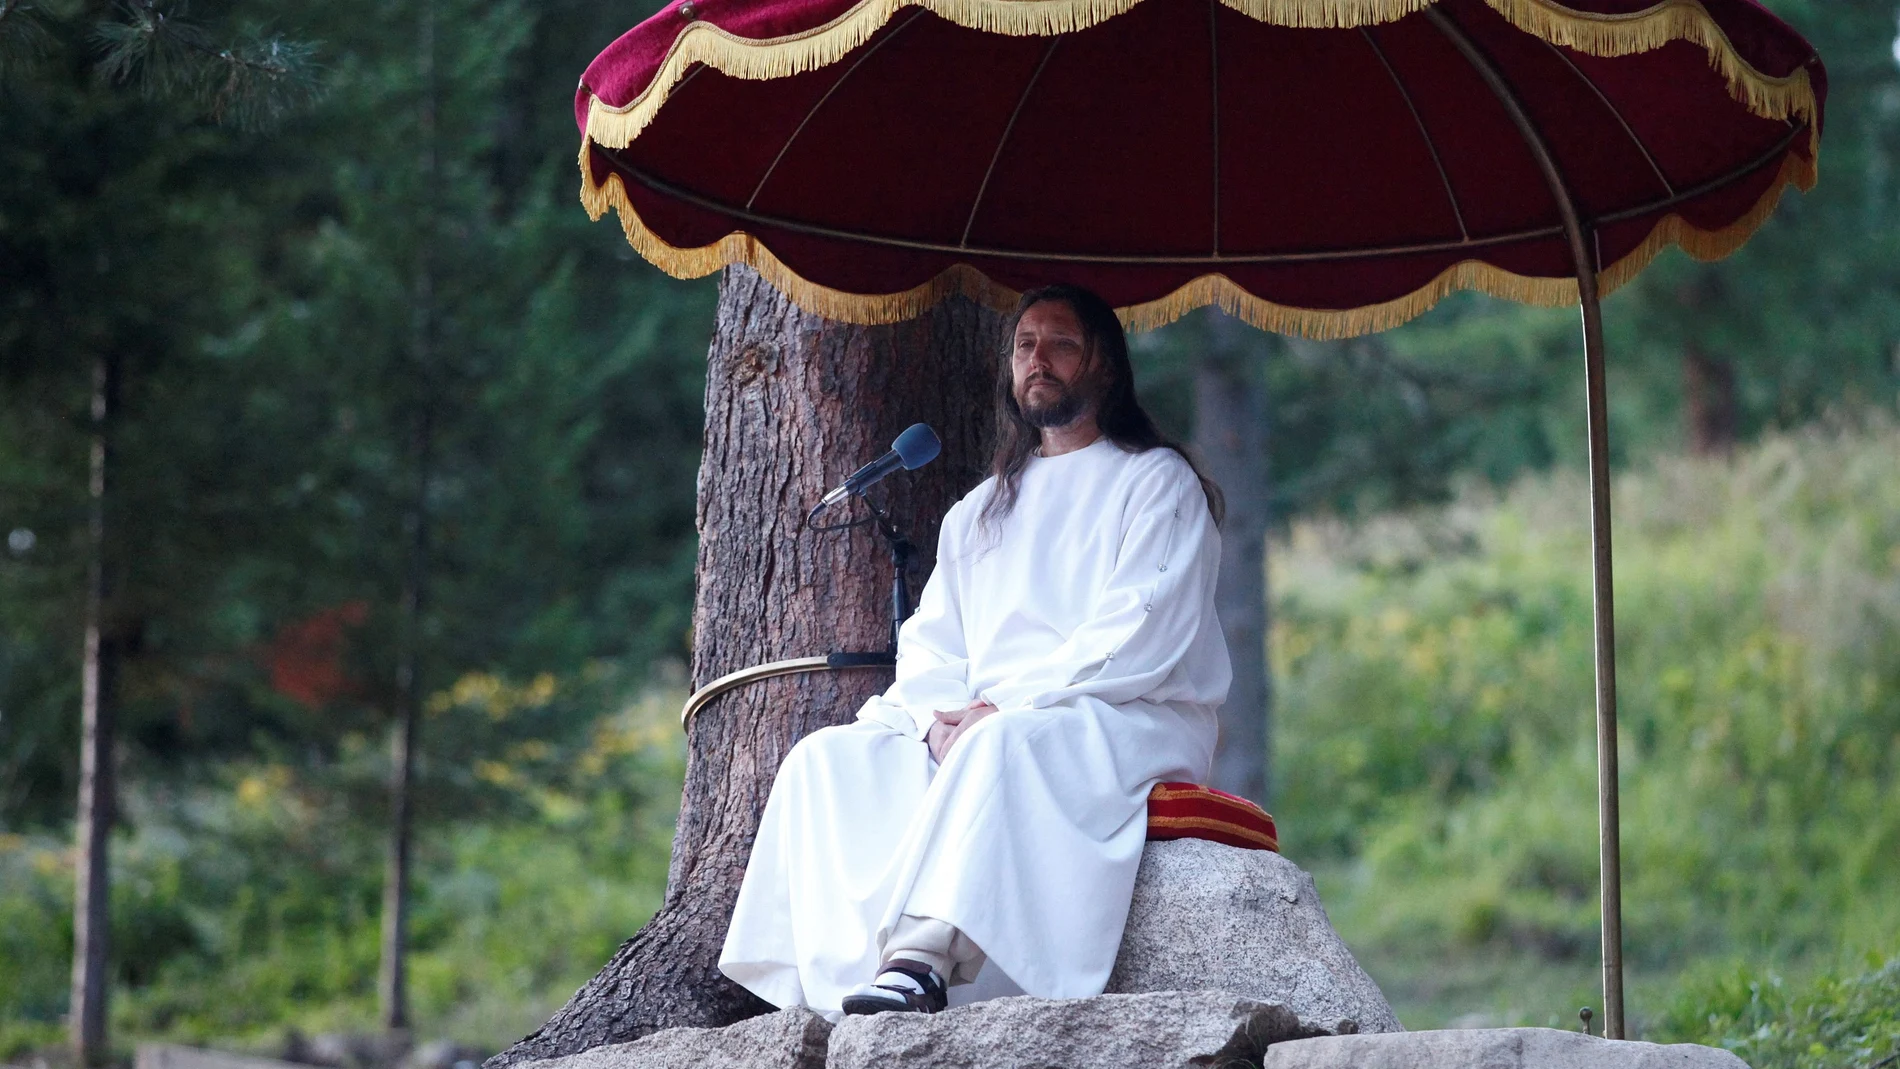 FILE PHOTO: Vissarion, who has proclaimed himself a new Christ, conducts a service during the &#34;Holiday of Good Fruit&#34; feast in the village of Obitel Rassveta (Cloister of Sunrise), some 640 km (398 miles) southeast of Russia&#39;s Siberian city of Krasnoyarsk, Russia August 18, 2010. REUTERS/Ilya Naymushin/File Photo